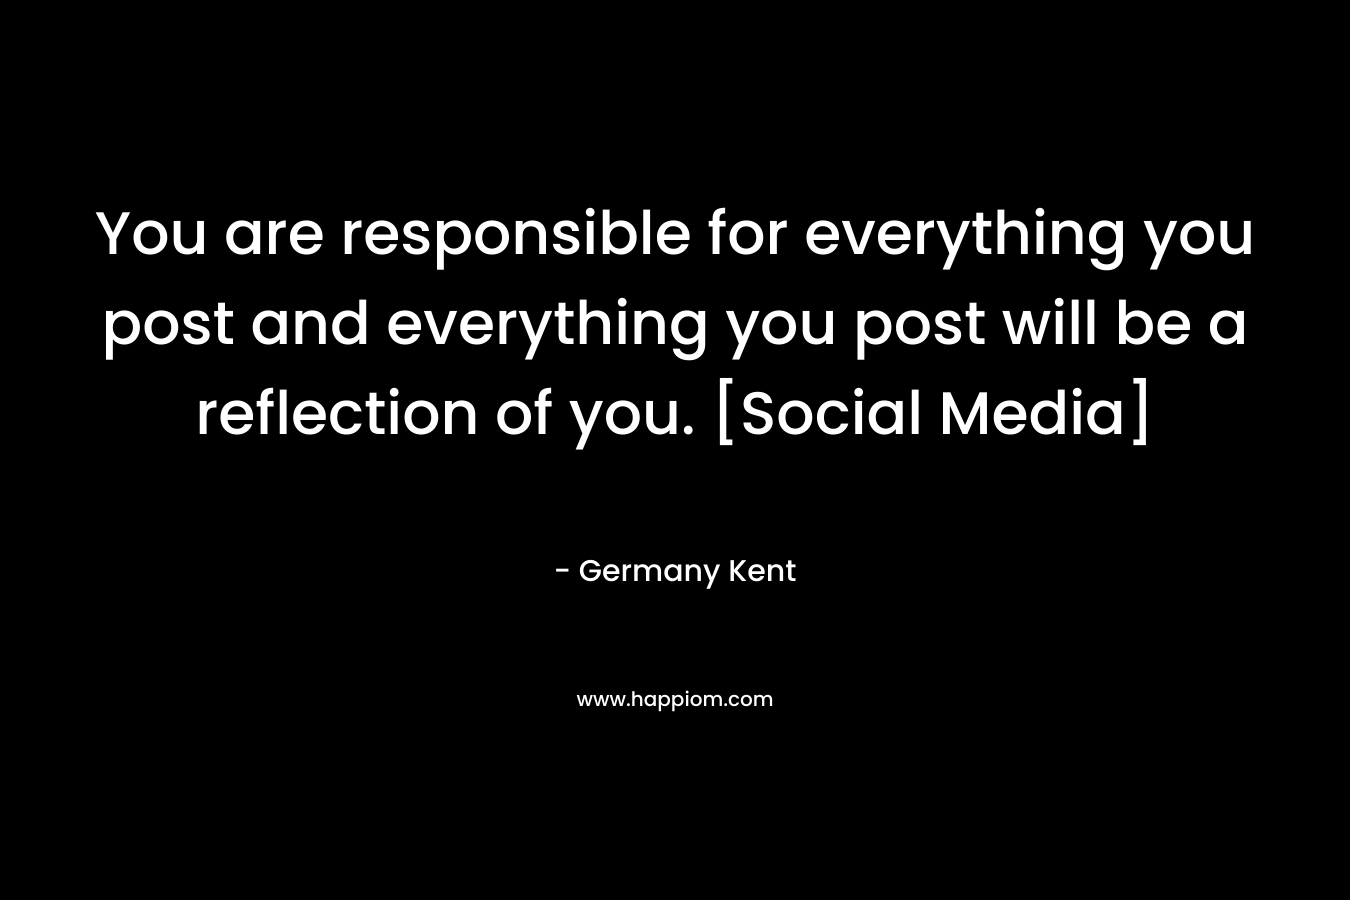 You are responsible for everything you post and everything you post will be a reflection of you. [Social Media]